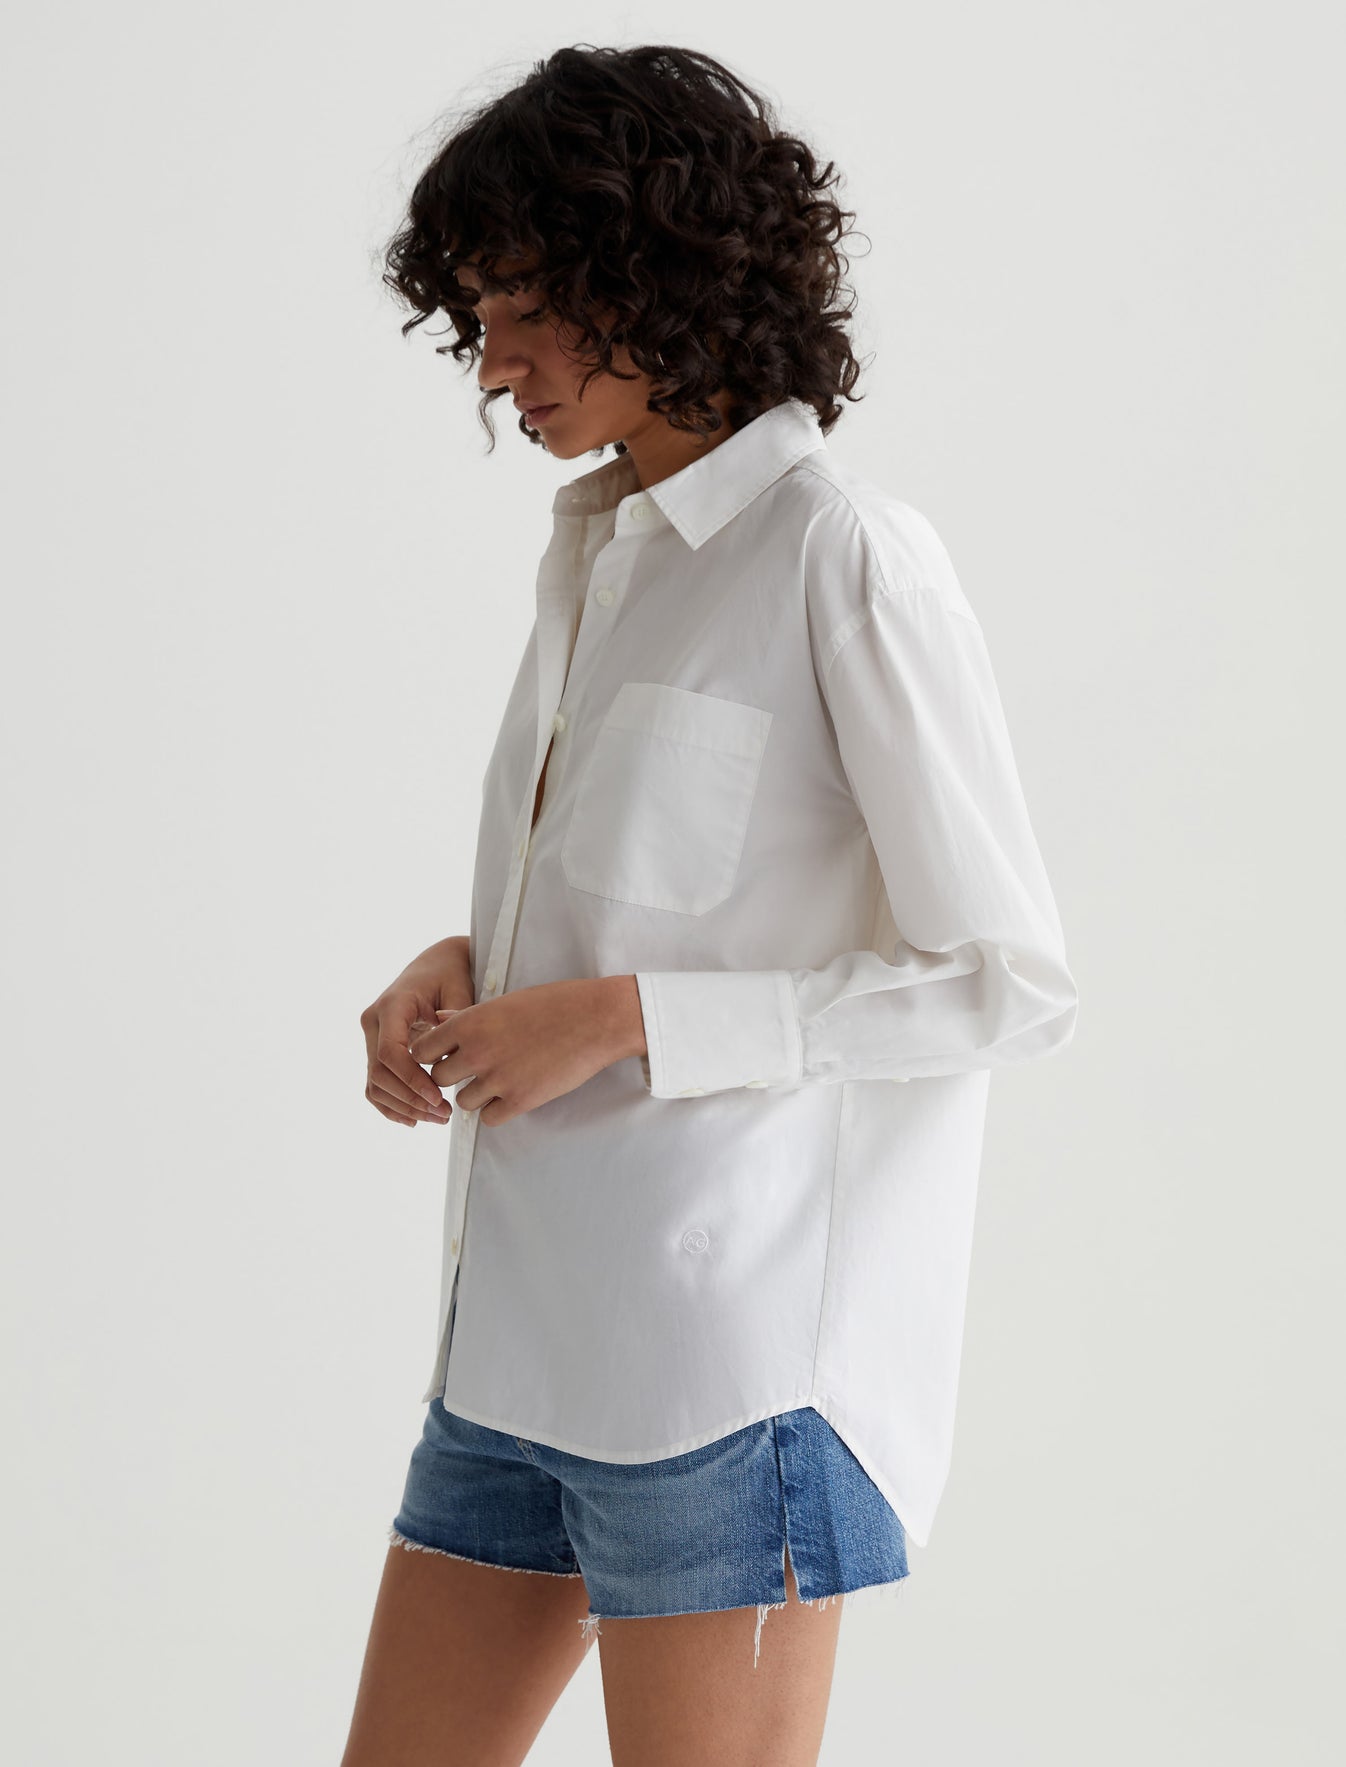 Addison Shirt Pearl White Relaxed Fit Long Sleeve Button-Up Shirt Women Top Photo 2